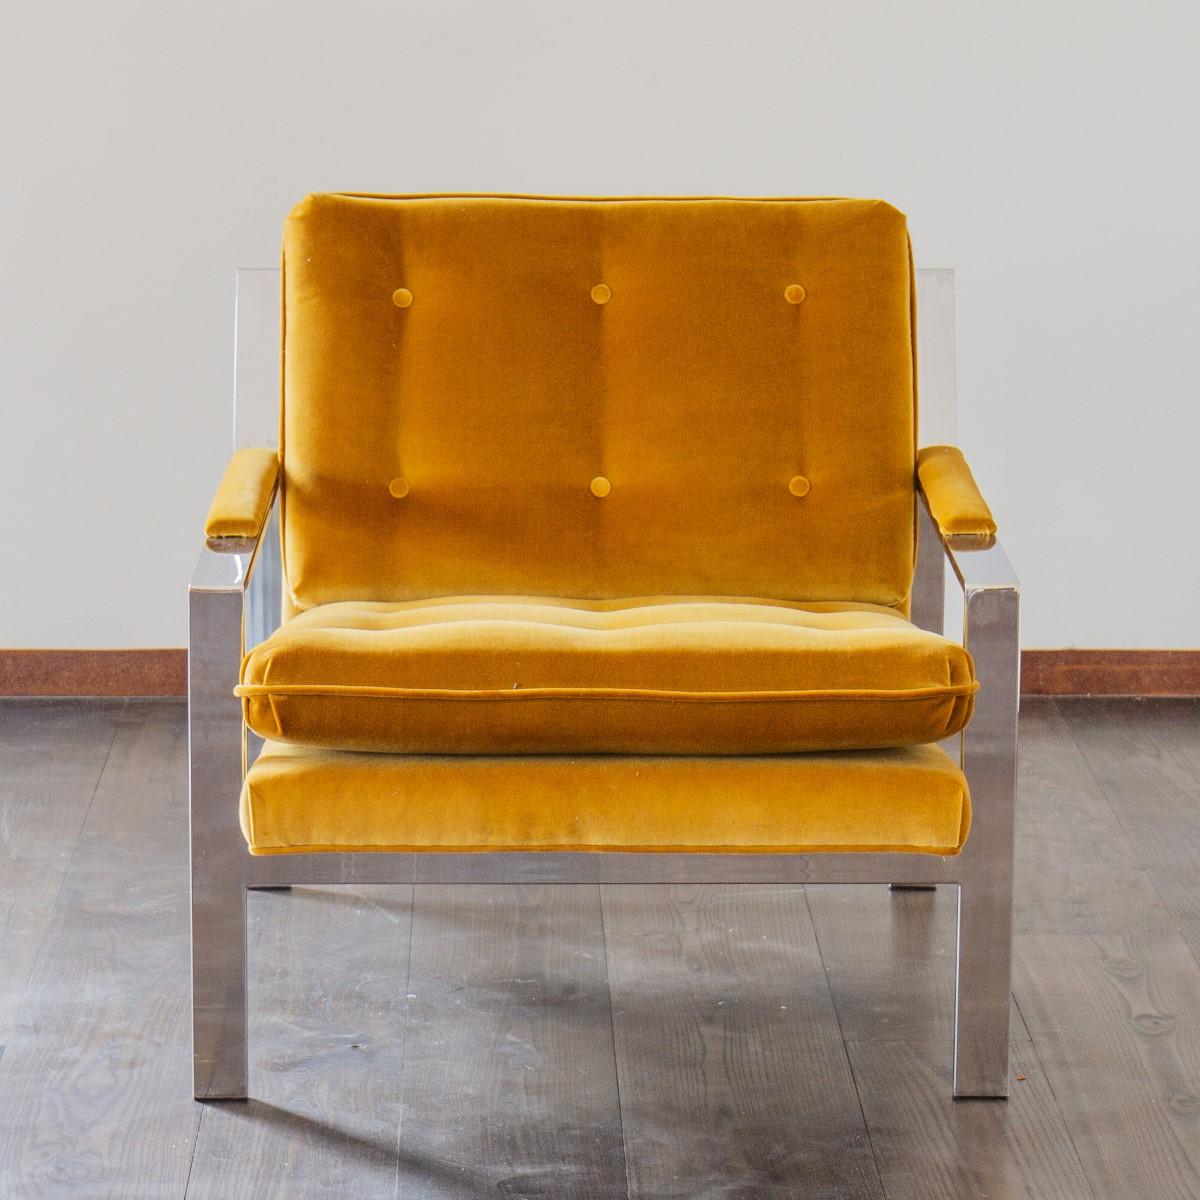 A single nickel plated lounge chair, model number 232 designed by Cy Mann, circa 1970s. The chair has been upholstered in a yellow velvet with buttoned detail to the seat and back and upholstered arm pads. Cy Mann designed chairs for Cy Mann Designs